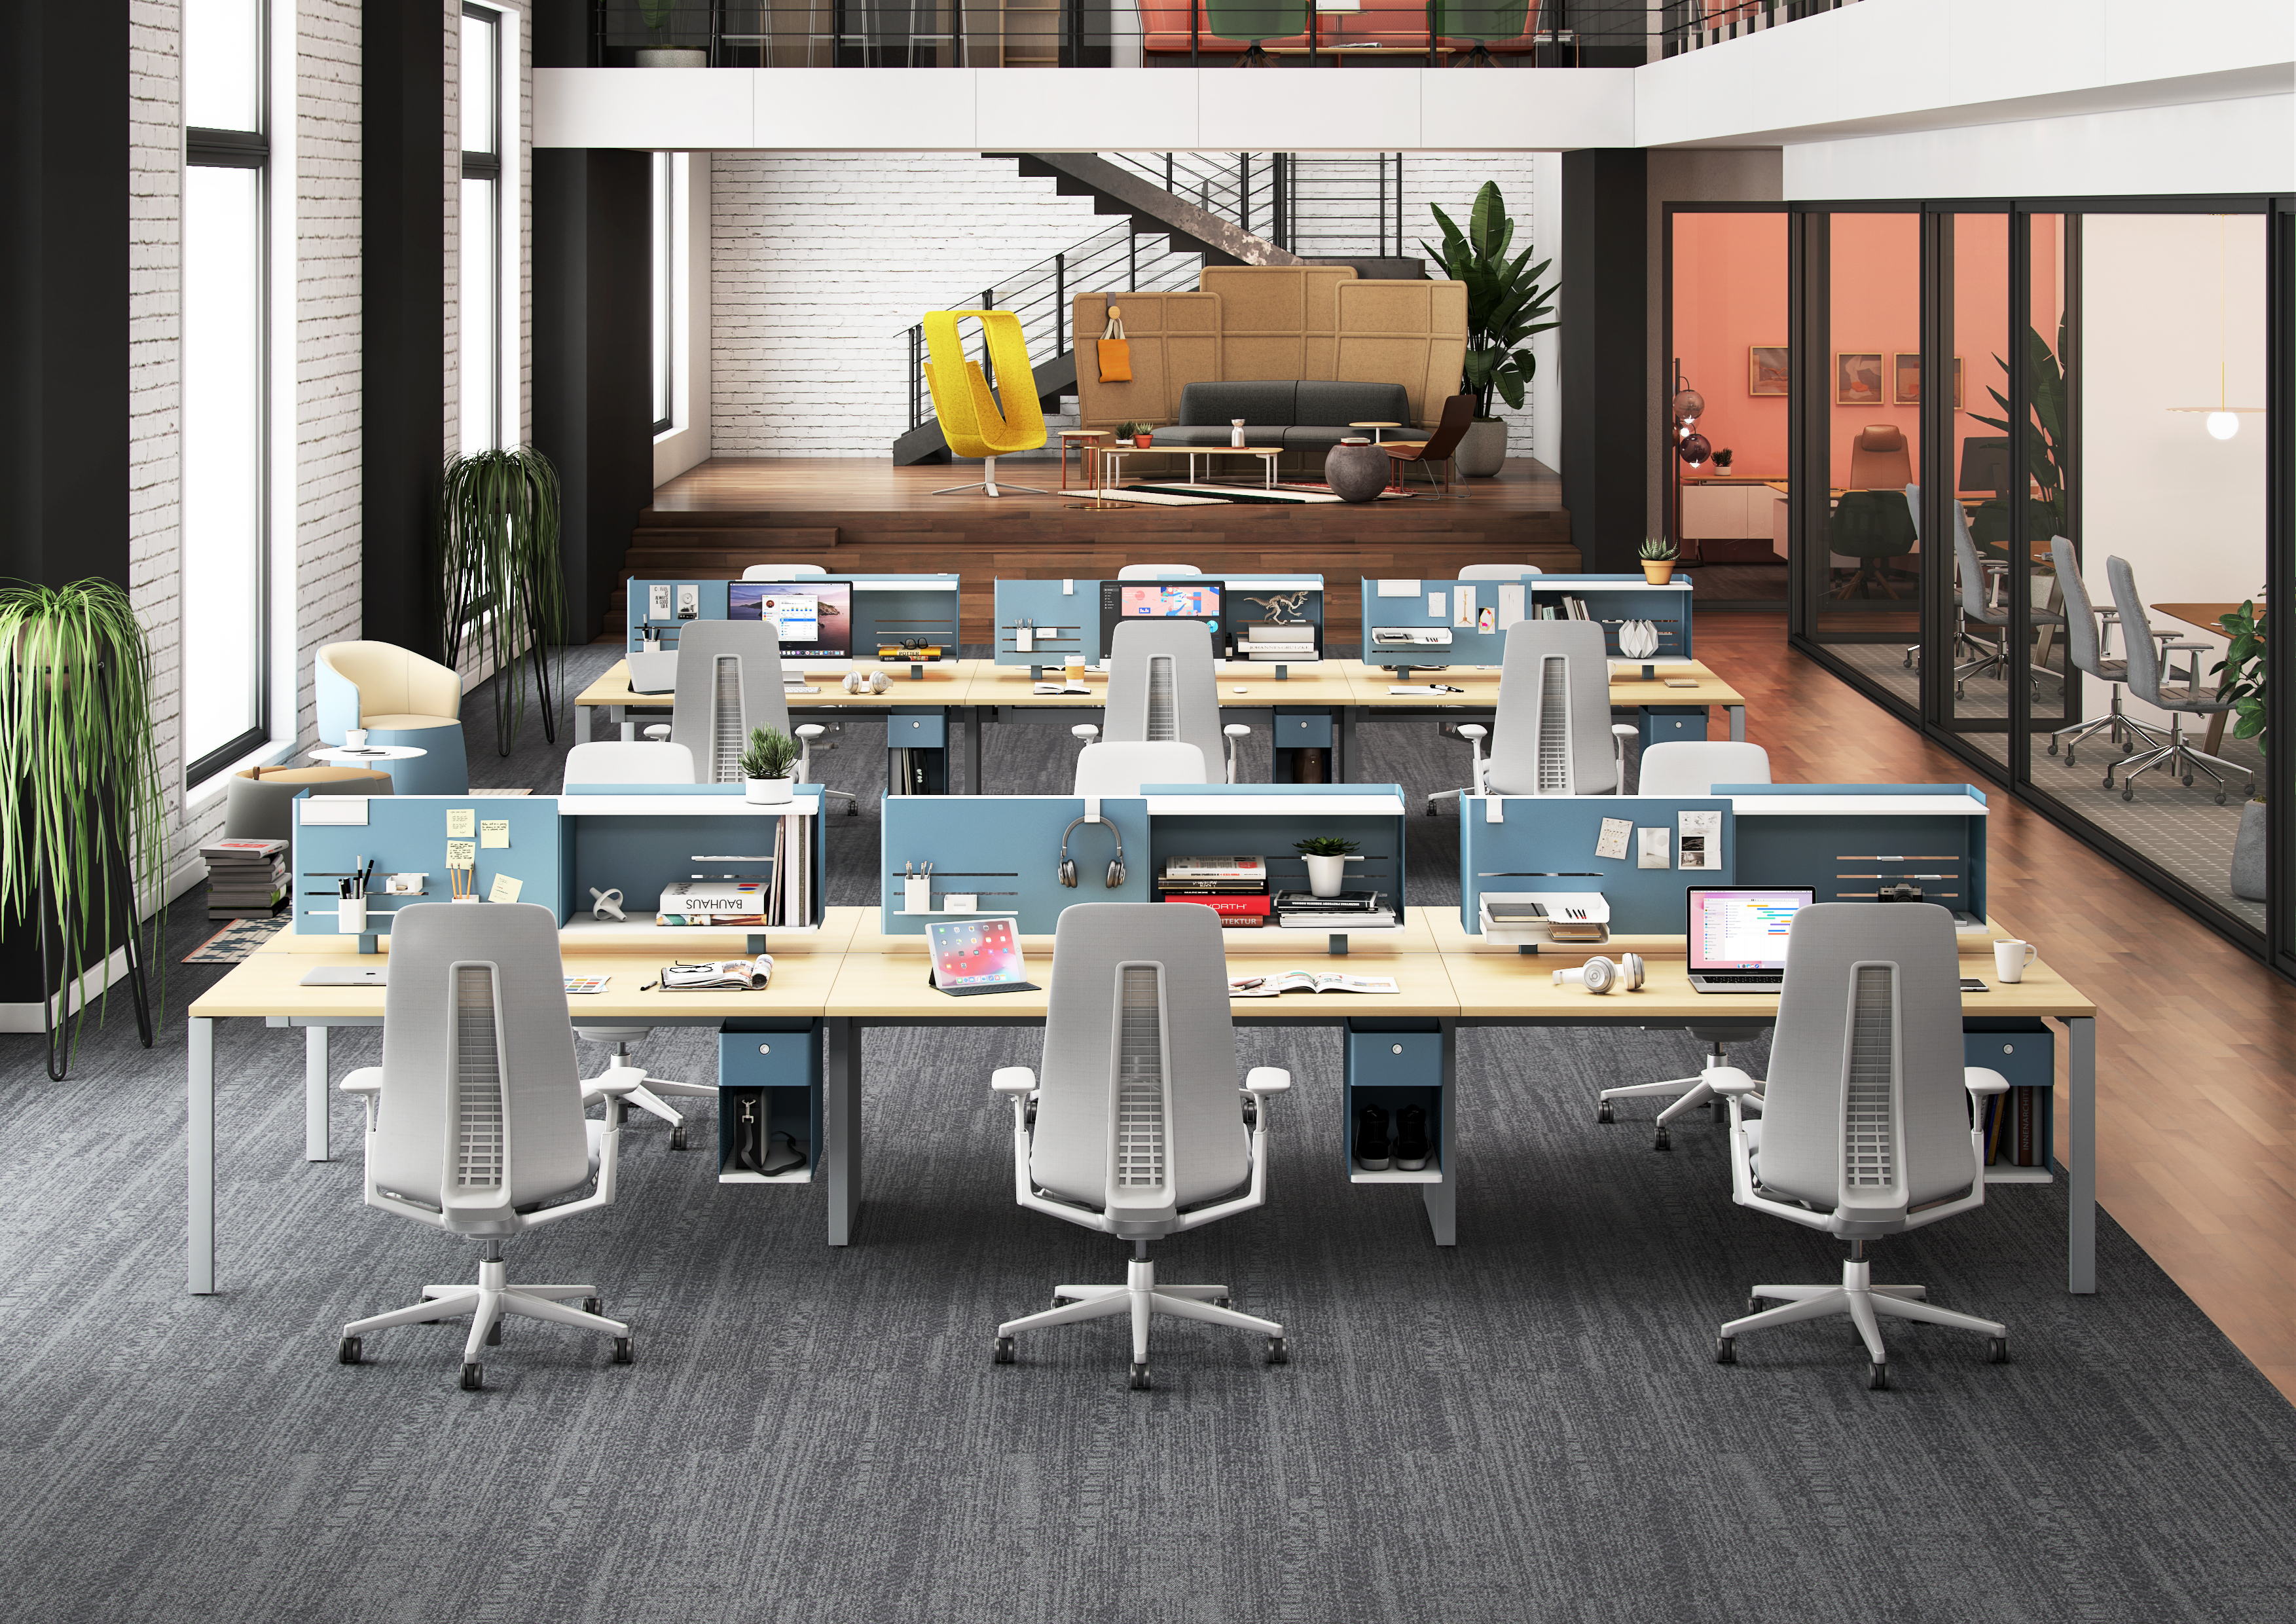 Active components desk in open office multiple individual work spaces with Fern chairs